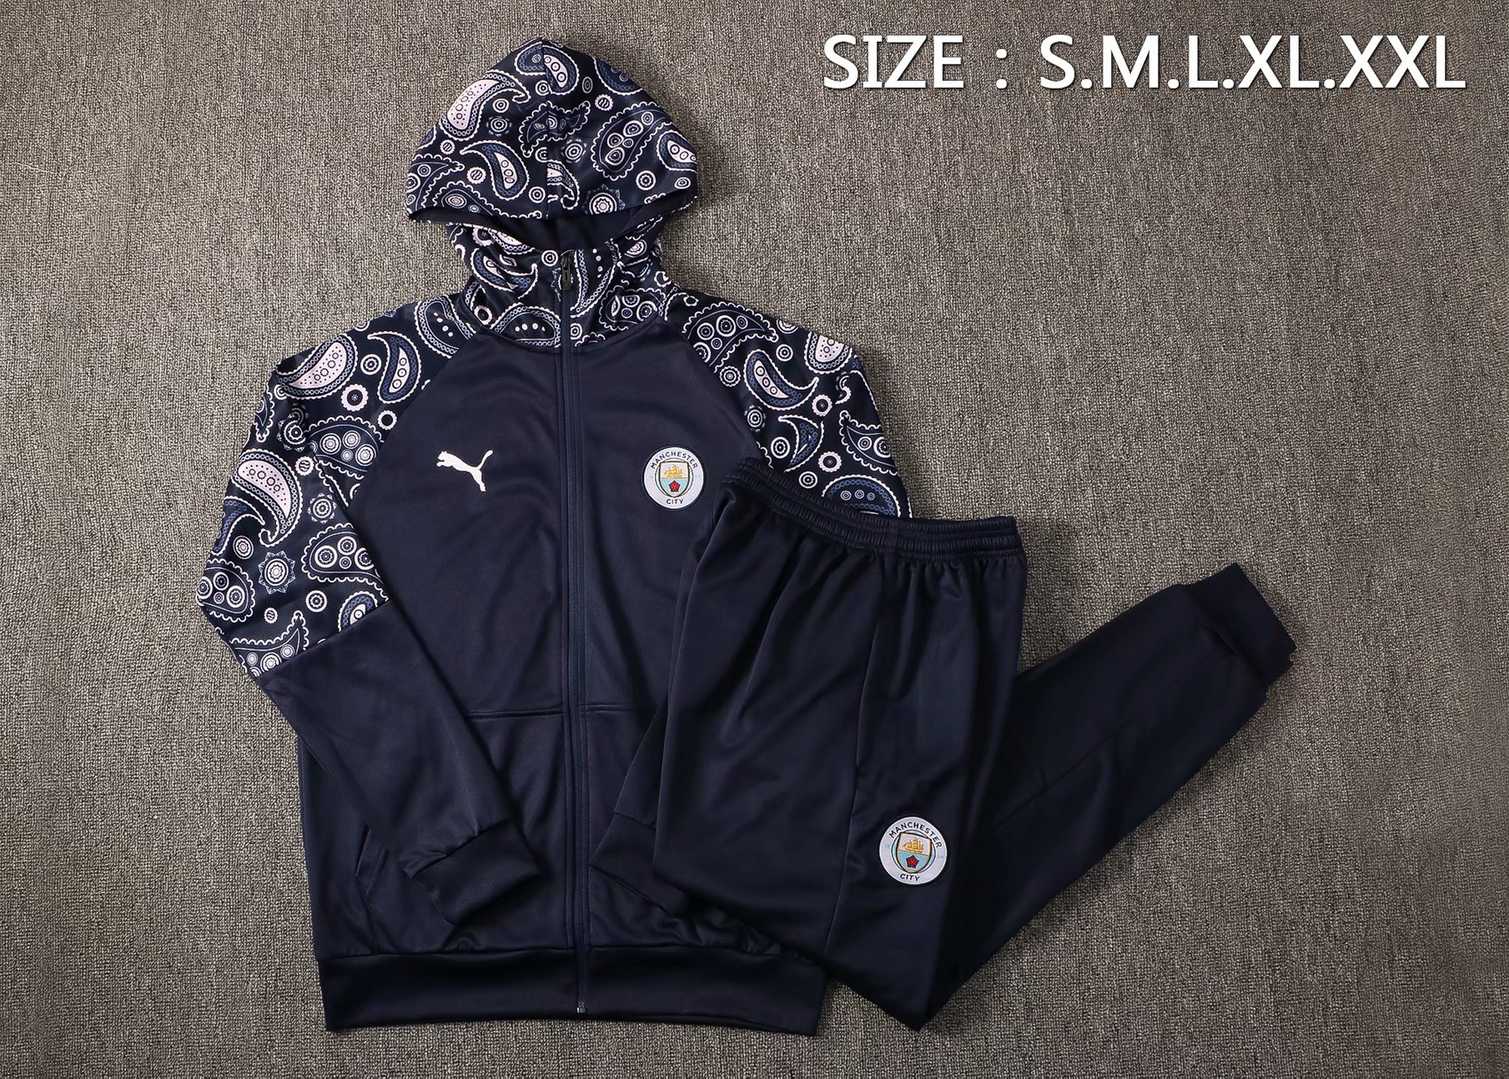 2020/21 Manchester City Hoodie Navy Soccer Training Suit (Jacket + Pants) Mens